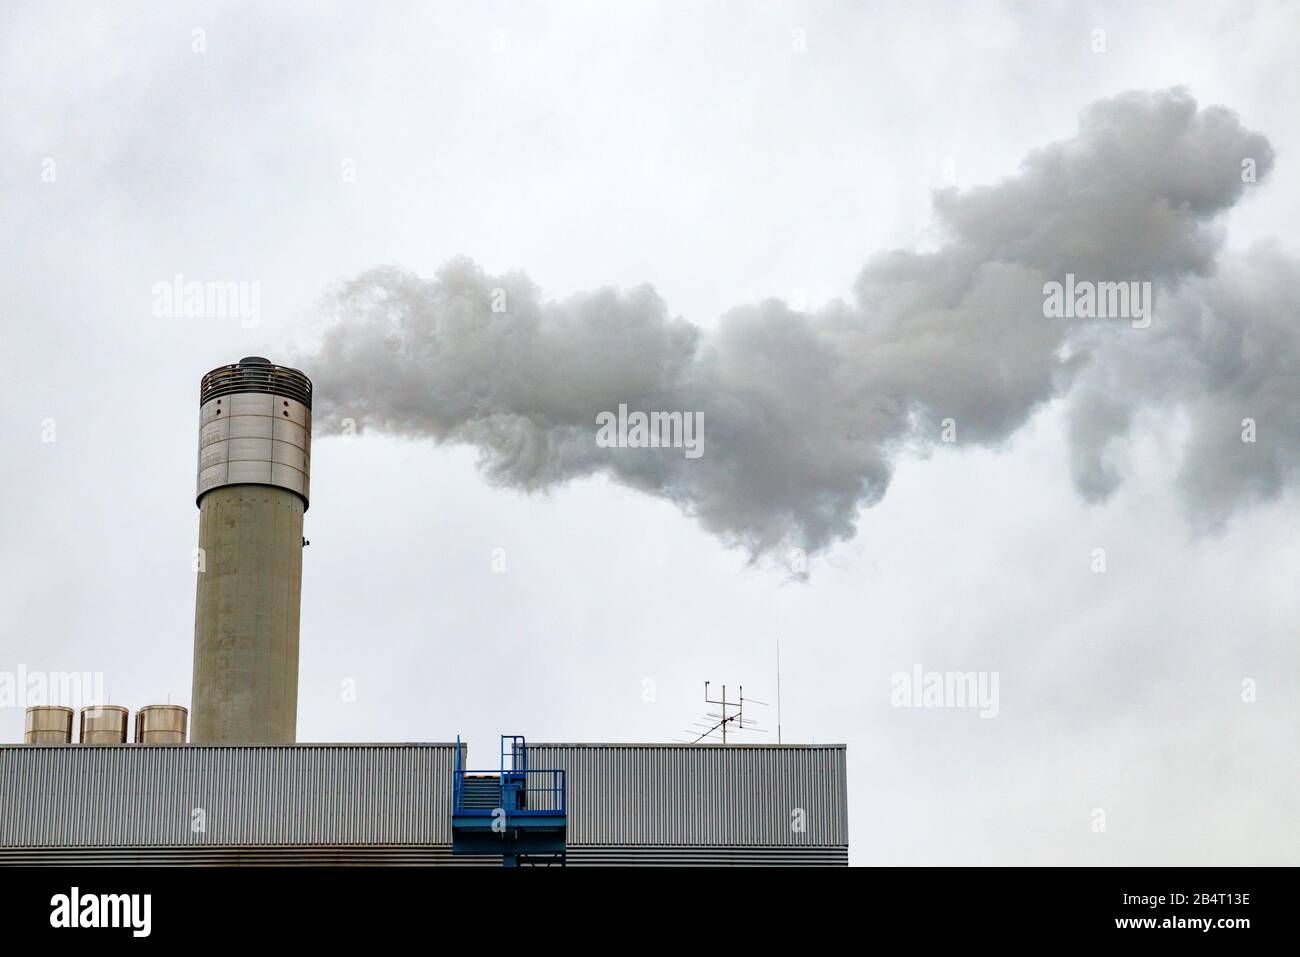 Powerplant with a chimney emitting gases into the atmosphere, causing air pollution. Gray, cloudy sky. Stock Photo